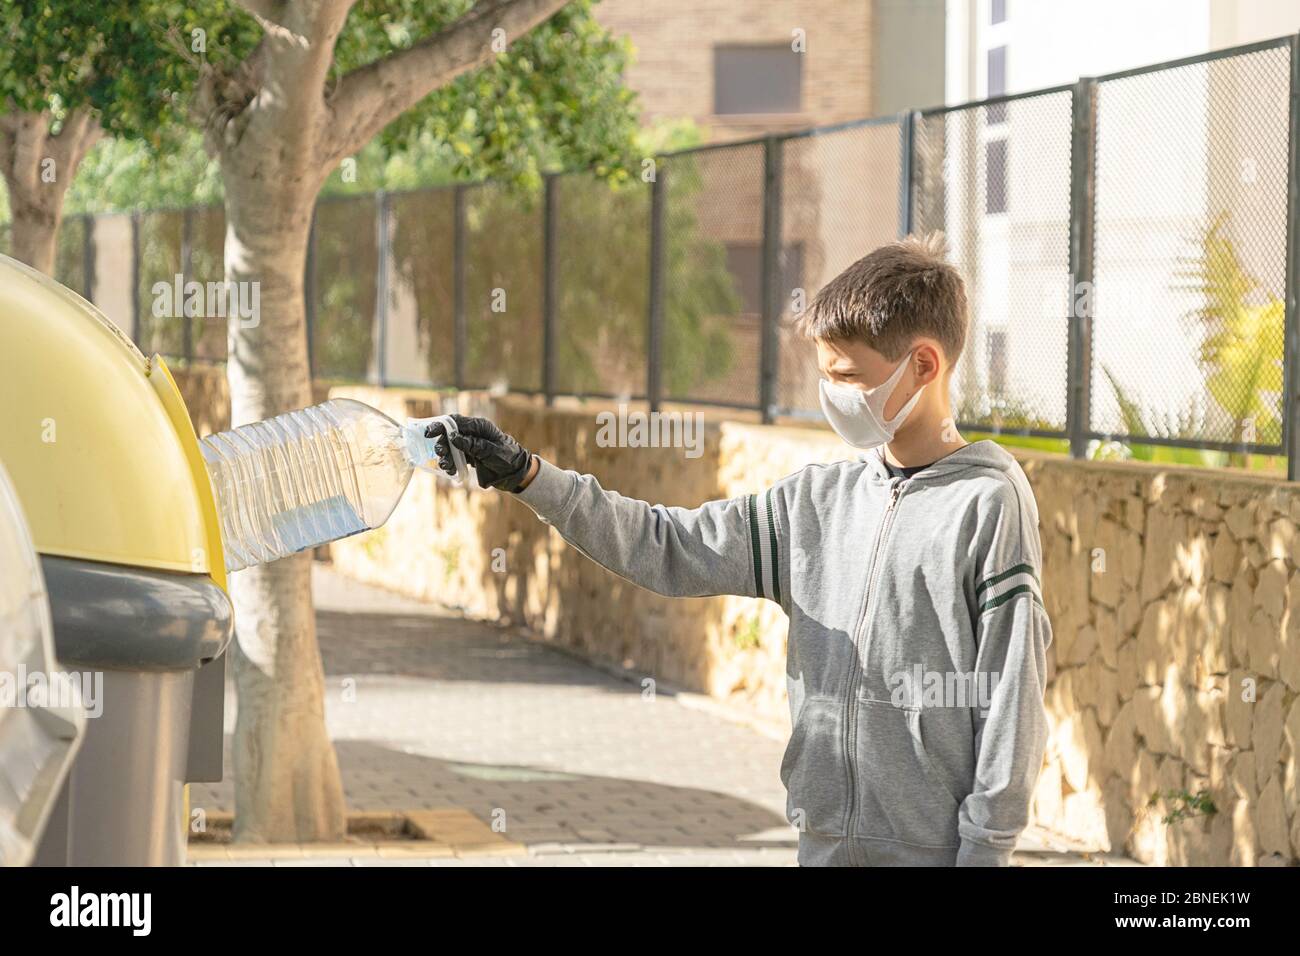 Child with protective mask and gloves throwing empty plastic bottle into recycling bin near residential apartment building outdoors Stock Photo